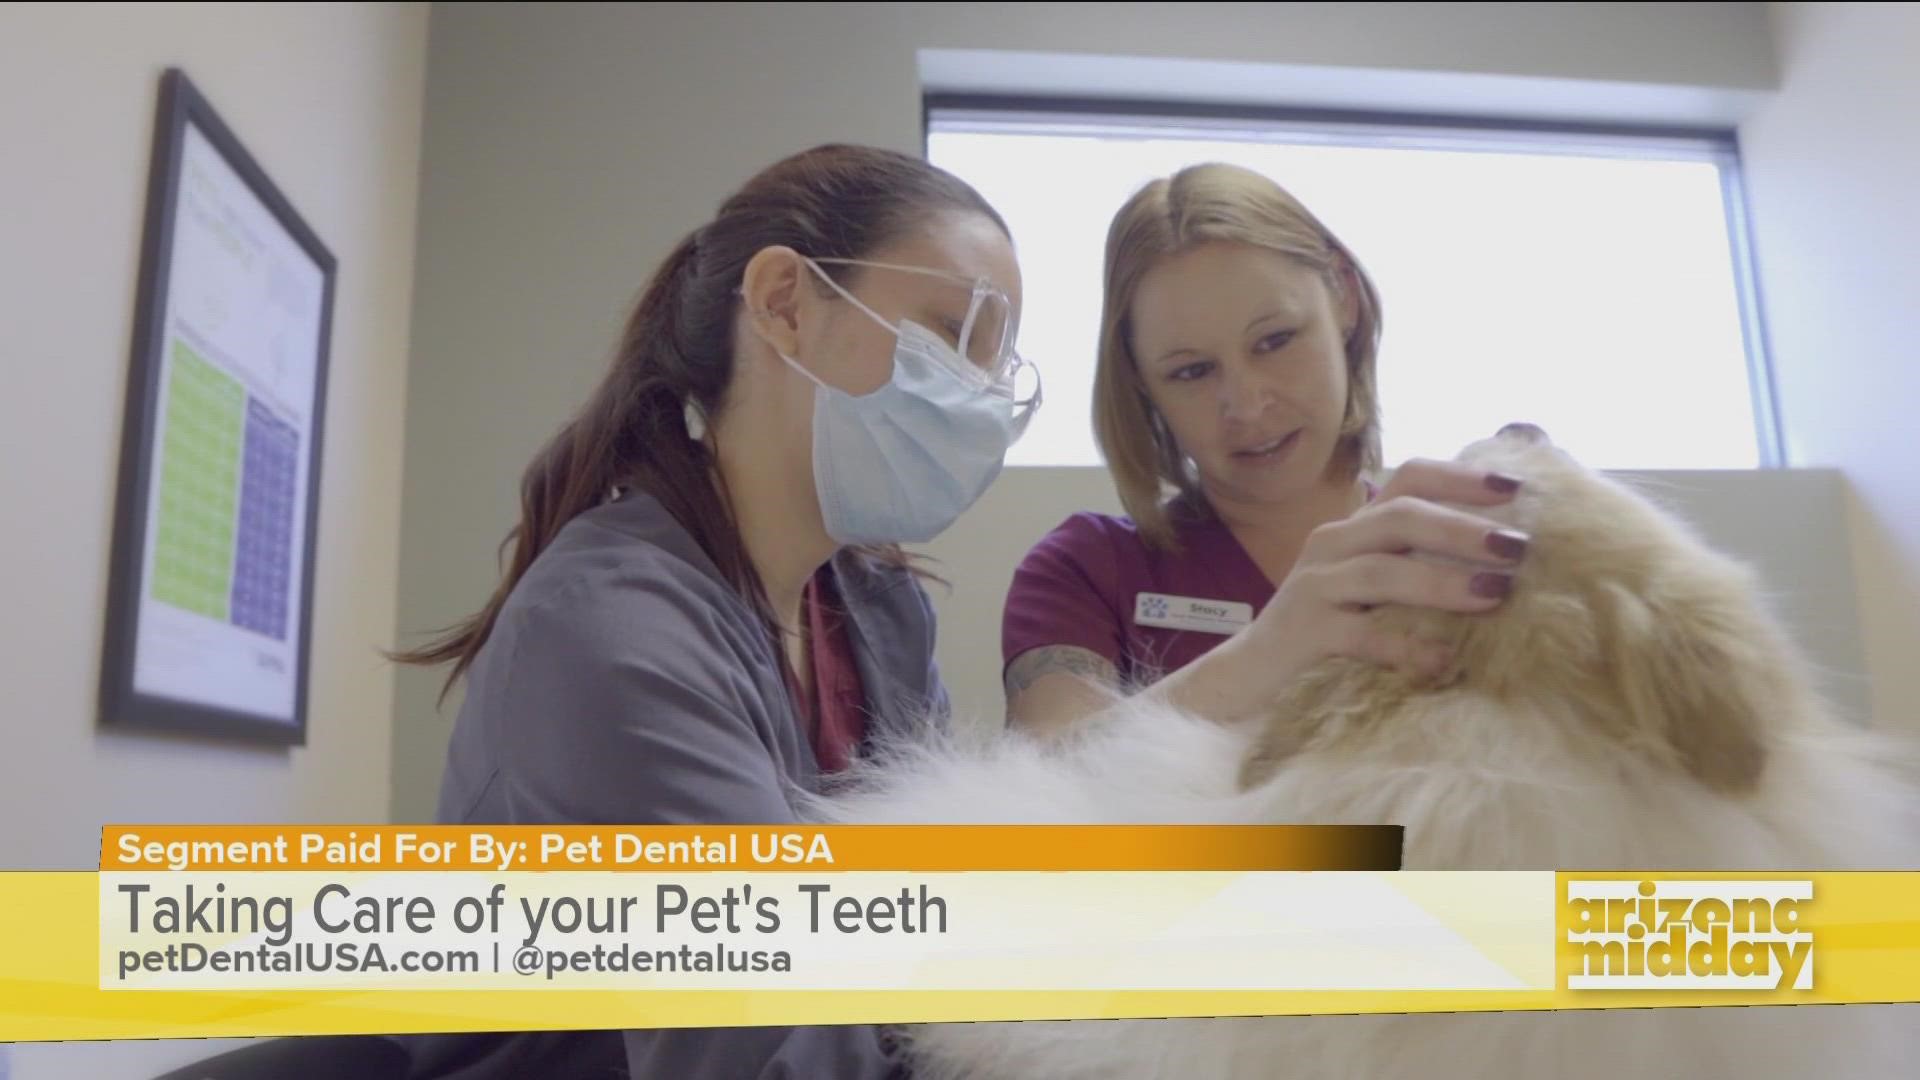 Dr. Kerry Mead with Pet Dental USA talks about the importance of keeping your pets teeth healthy and clean.